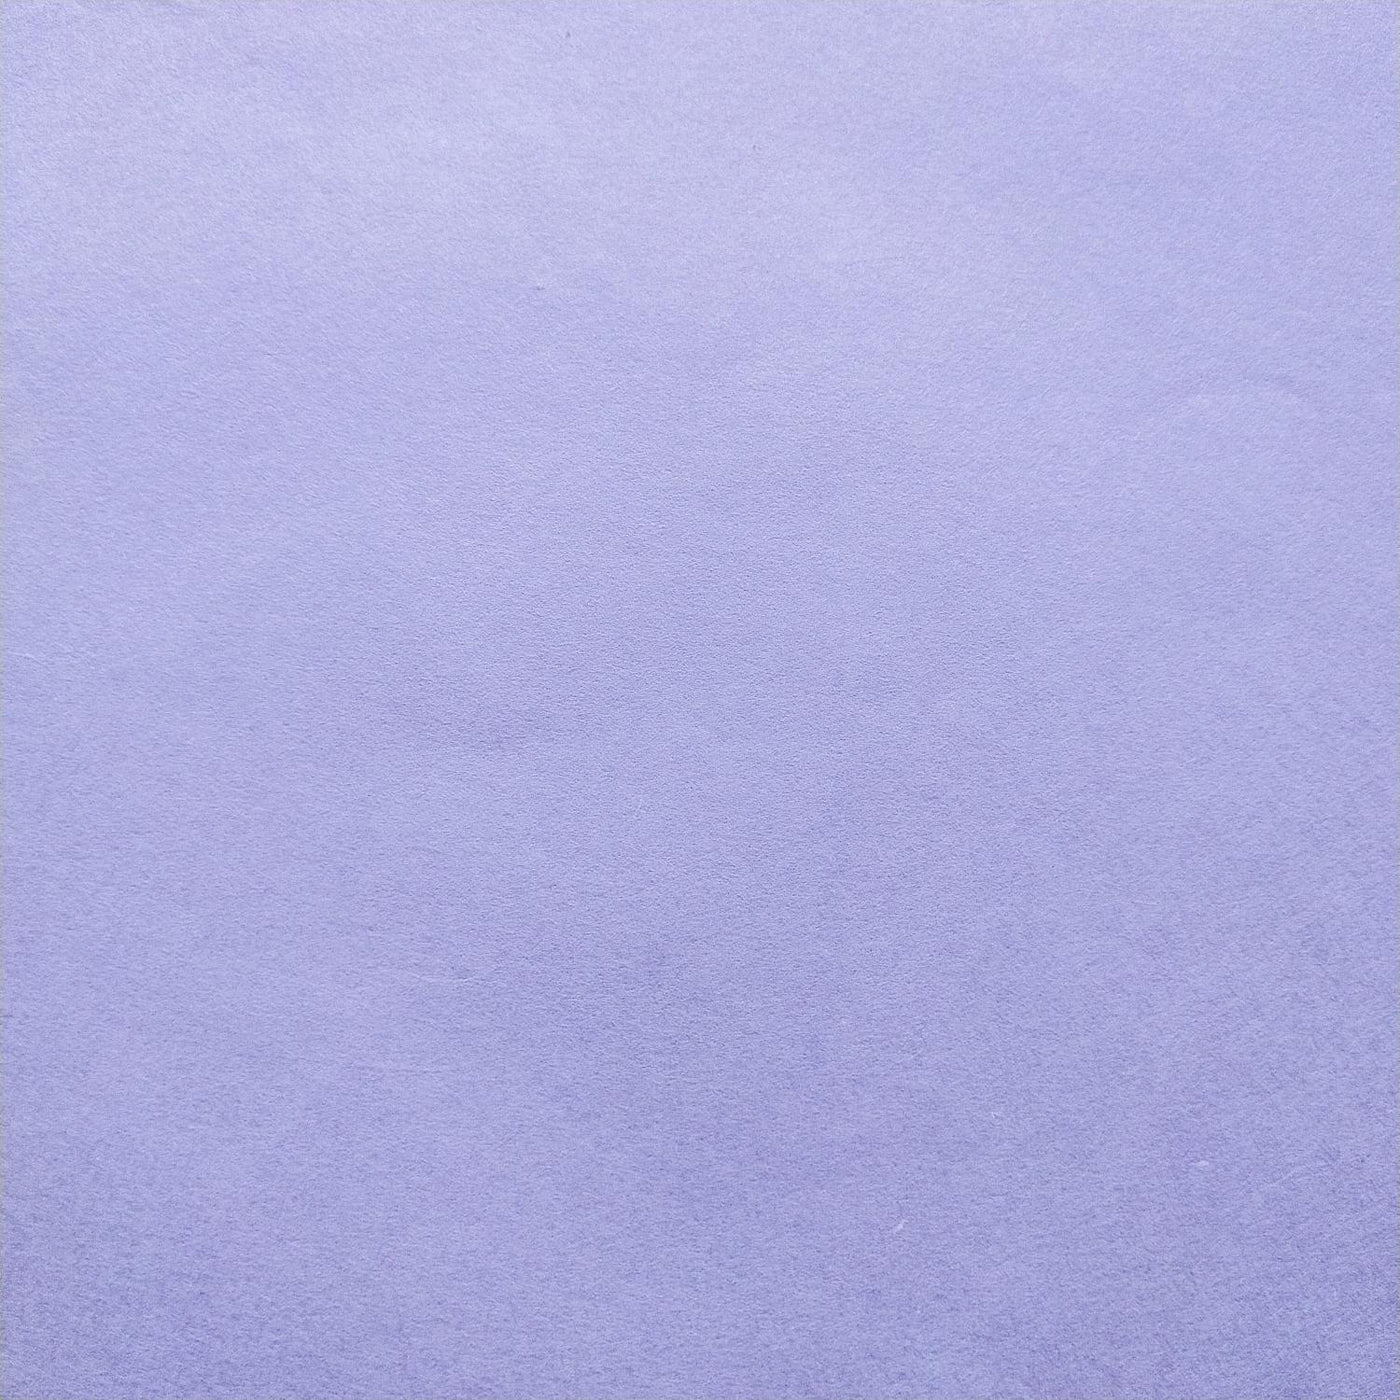 Solid-Colored Kozo Mulberry Paper (Heather Purple)